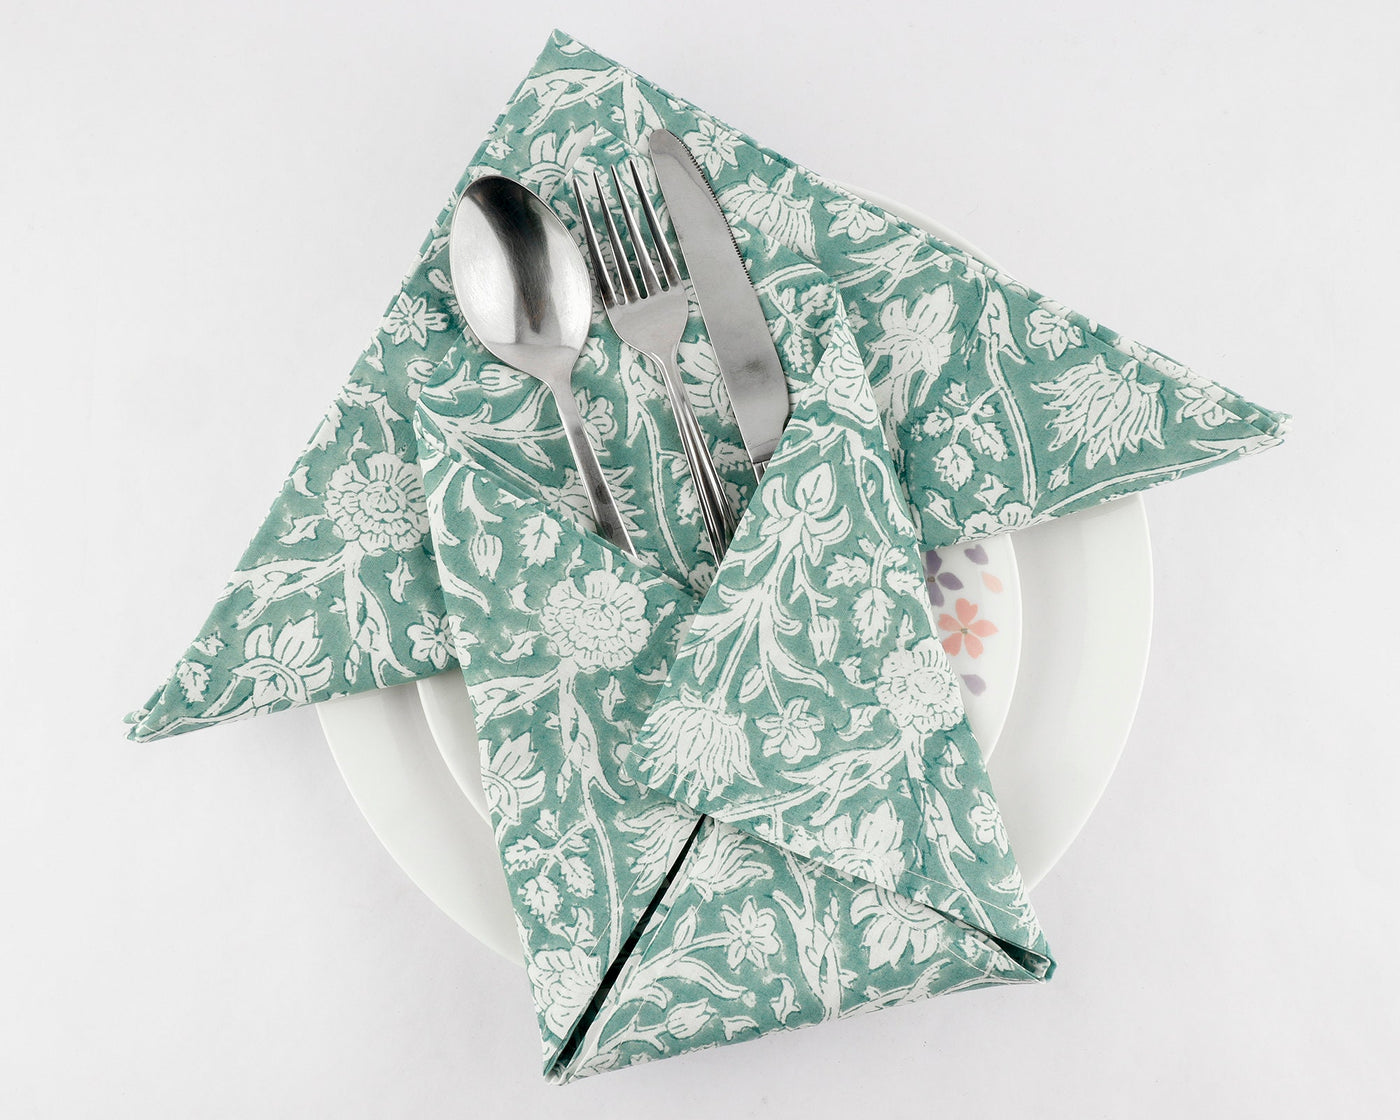 Peppermint Green Indian Floral Hand Block Printed Cotton Cloth Napkins Size  20x20 Set of 4,6,12,24,48 Wedding Party Home Decor Restaurant 